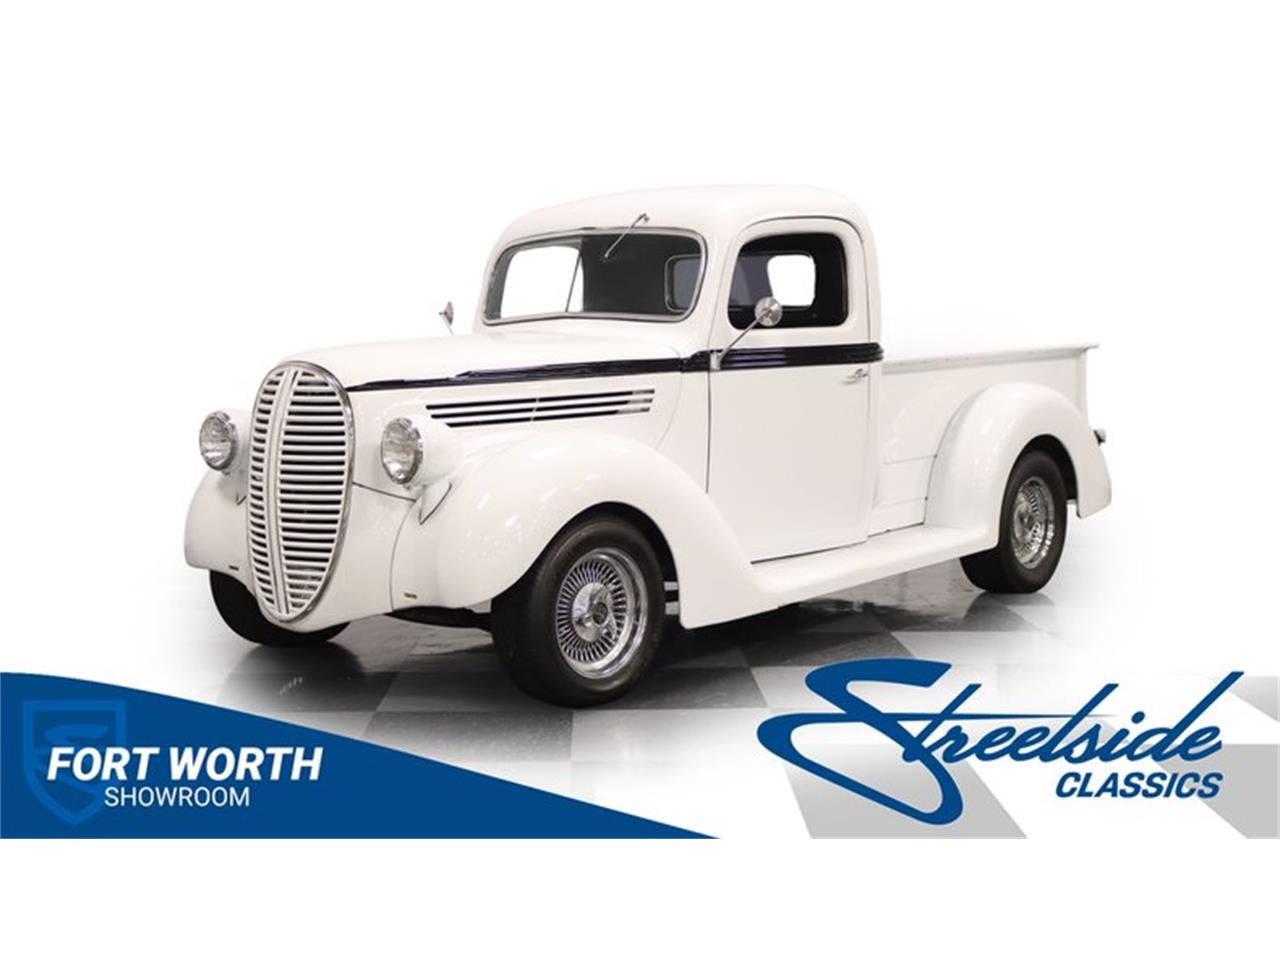 For Sale: 1938 Ford 3-Window Coupe in Ft Worth, Texas for sale in Fort Worth, TX